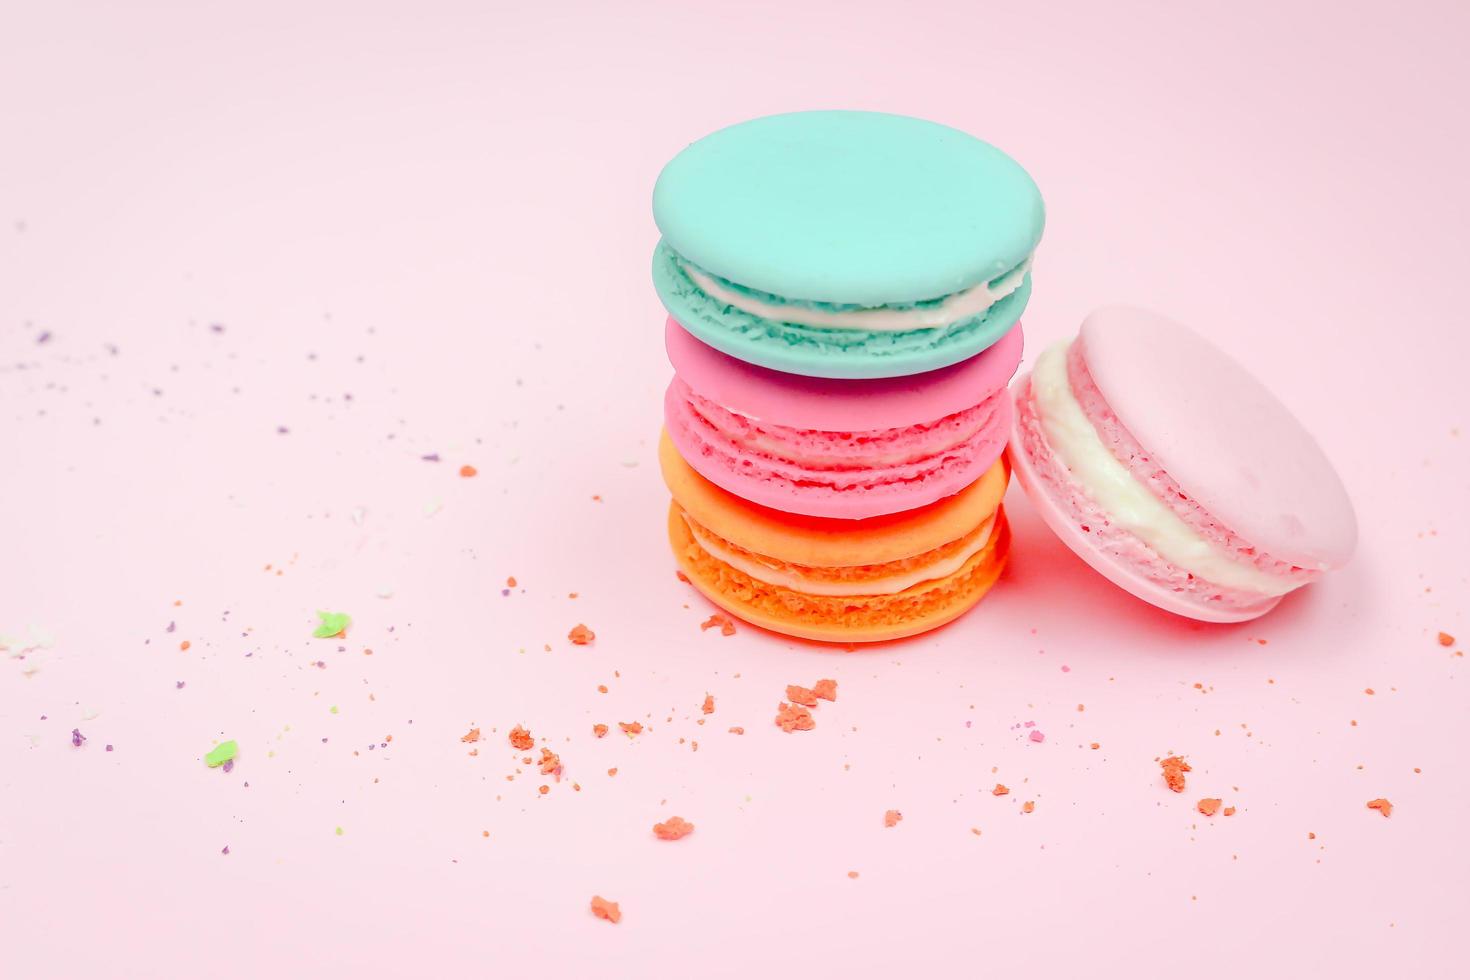 Colorful french macarons macaroons cake,  delicious sweet dessert on a pink background with copyspace, food background concept. photo